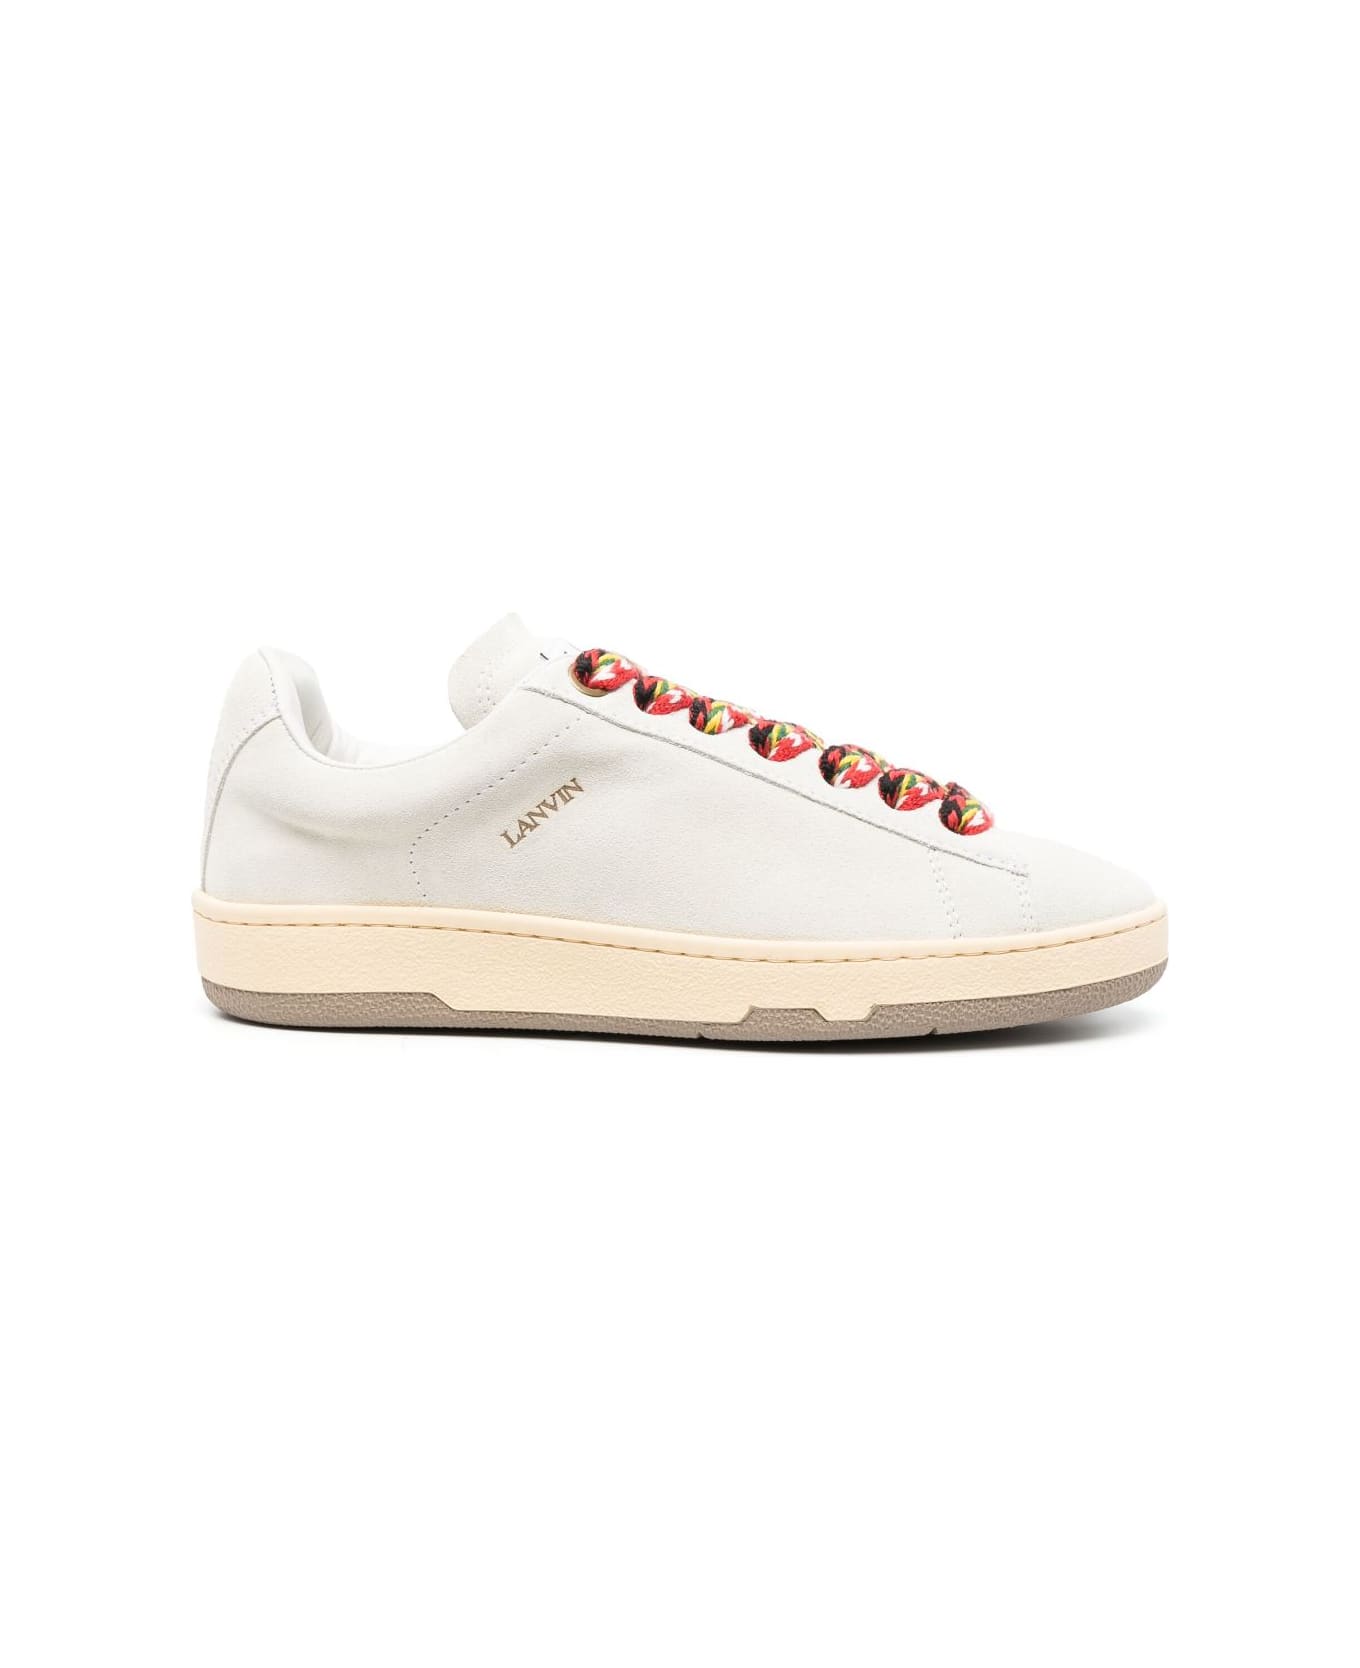 Lanvin Lite Curb Low Top Sneakers - White スニーカー